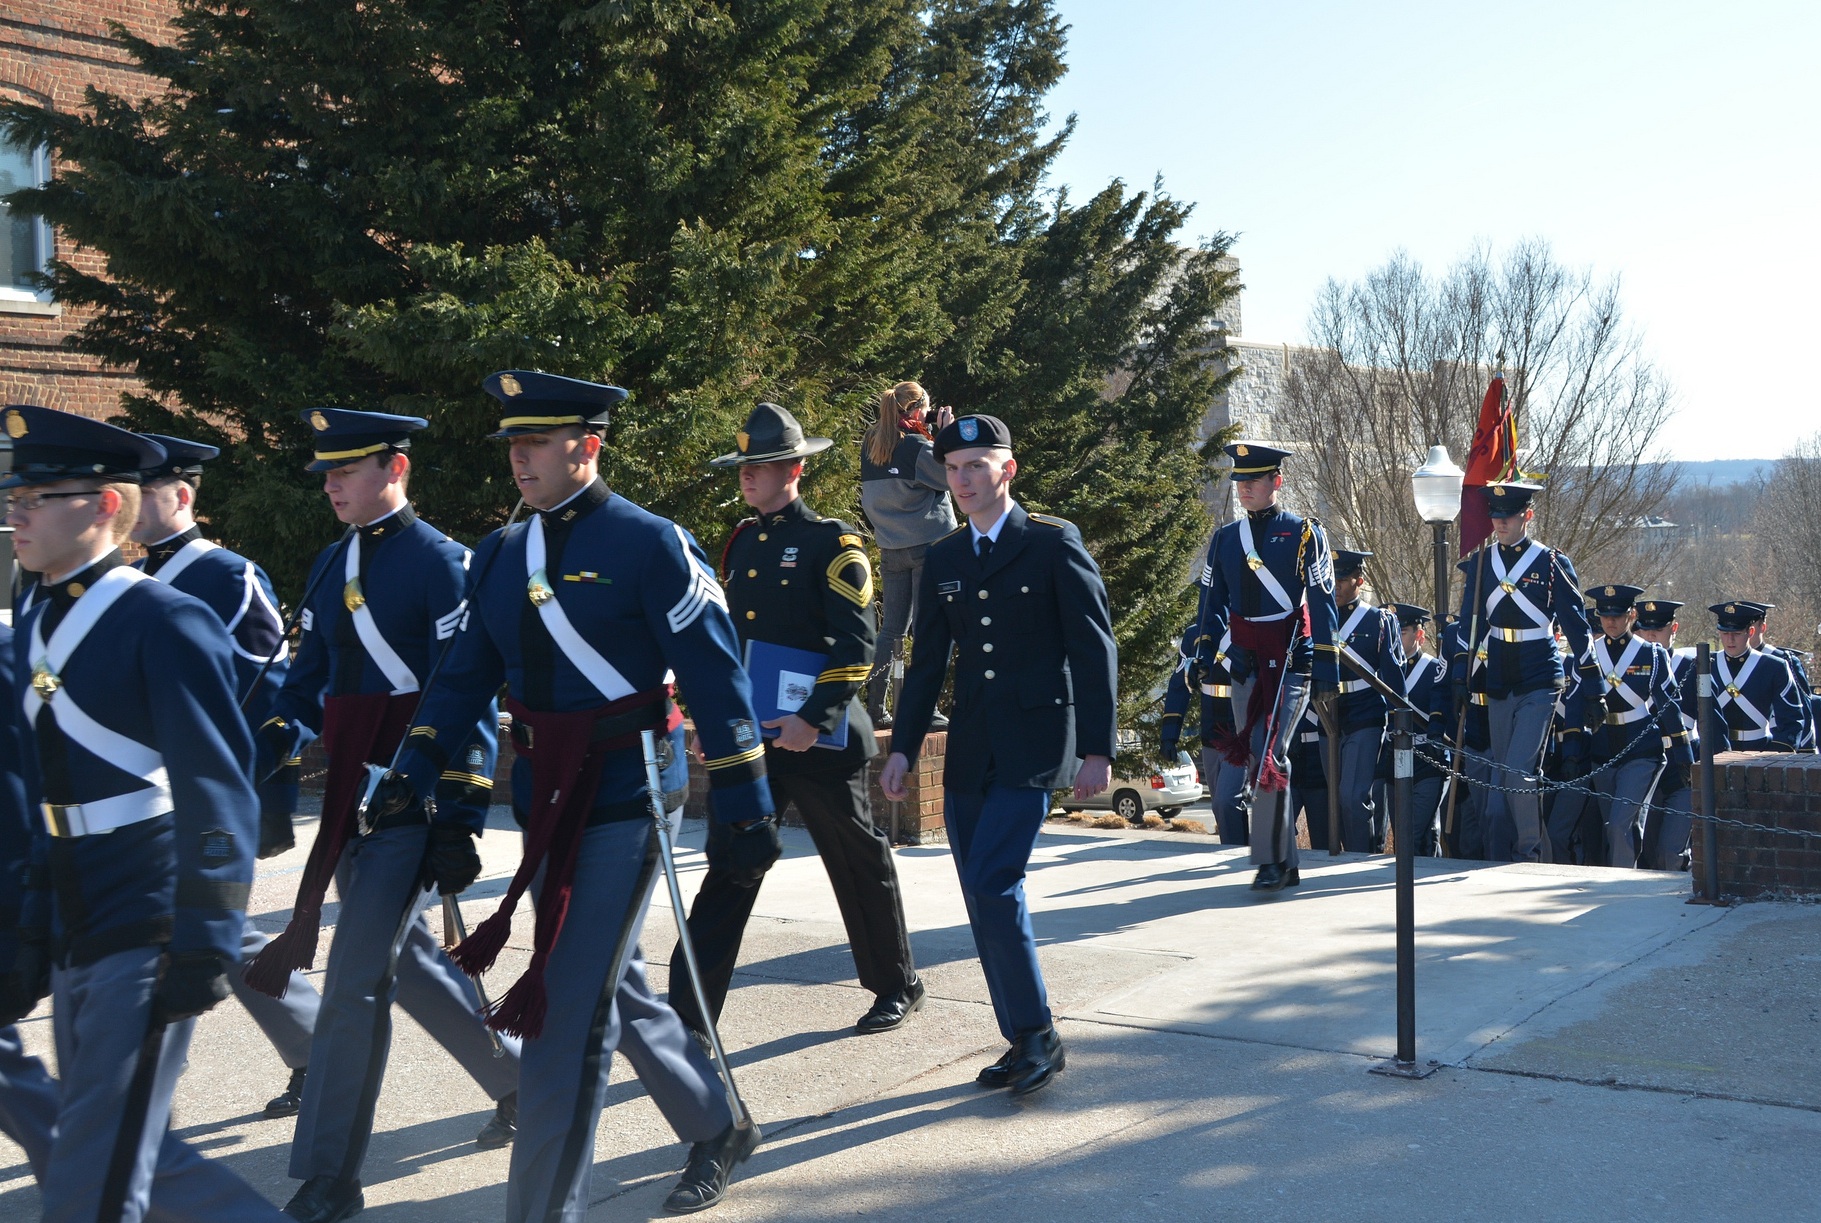 Visiting cadets join members of the Virginia Tech Corps of Cadets as they march to the annual leadership conference formal retreat ceremony on the Upper Quad.